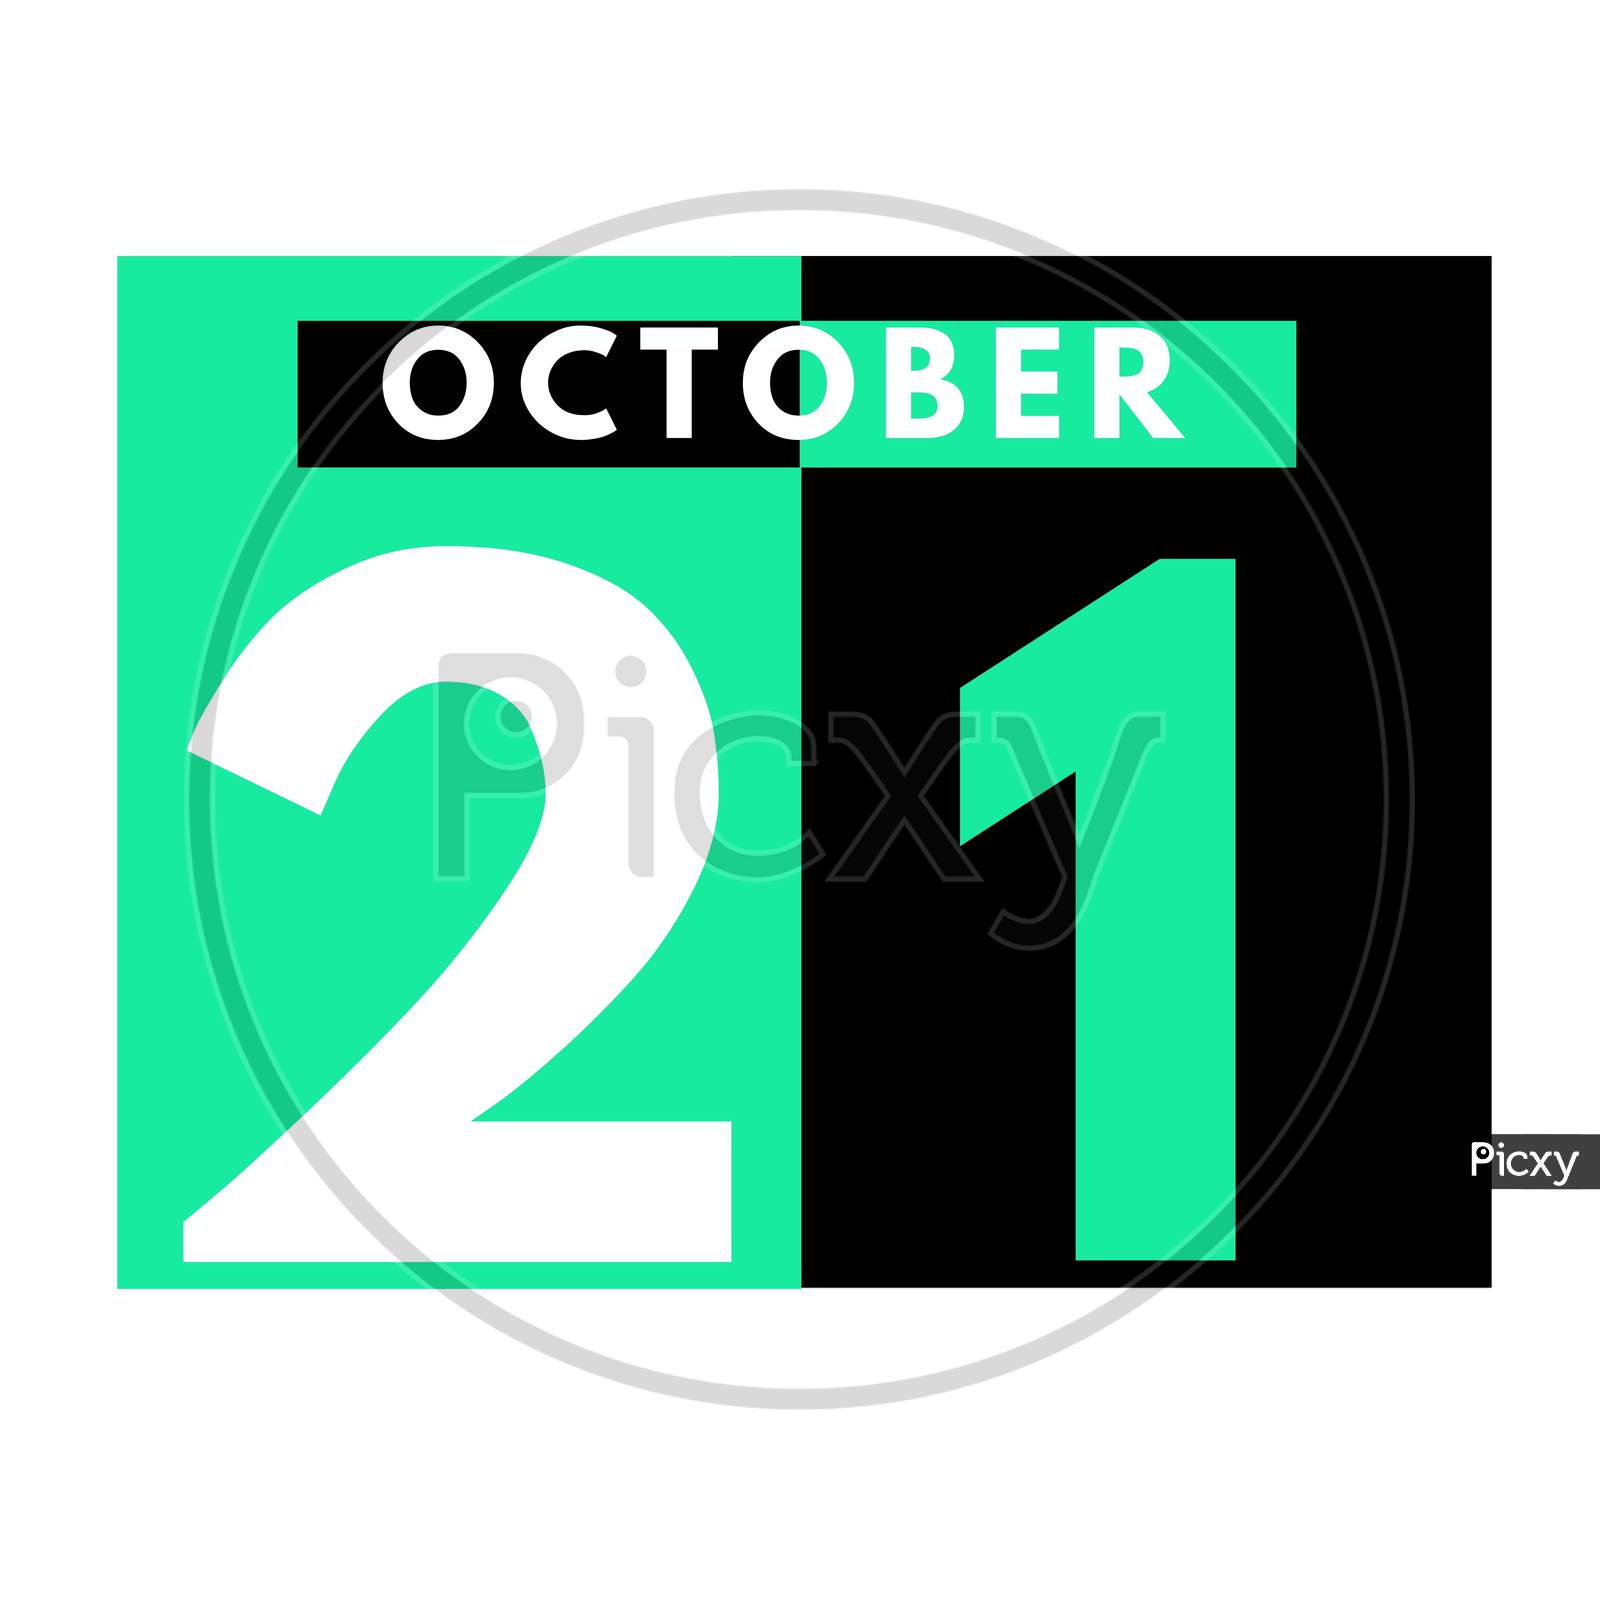 October 21 . Modern Daily Calendar Icon .Date ,Day, Month .Calendar For The Month Of October